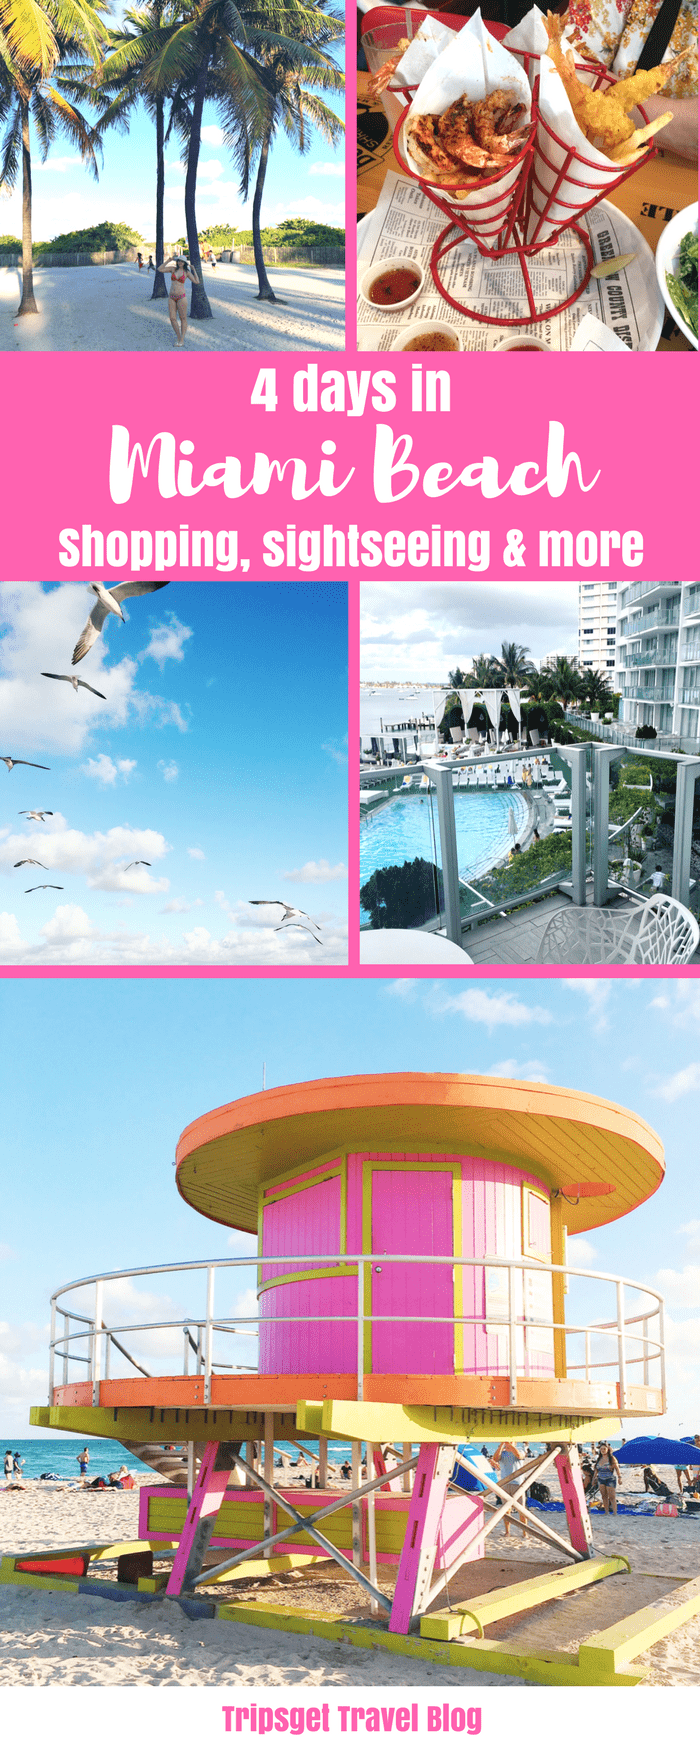 4 days in Miami Beach: from Sightseeing to Shopping. Food in Miami Beach. Sawgrass Mills